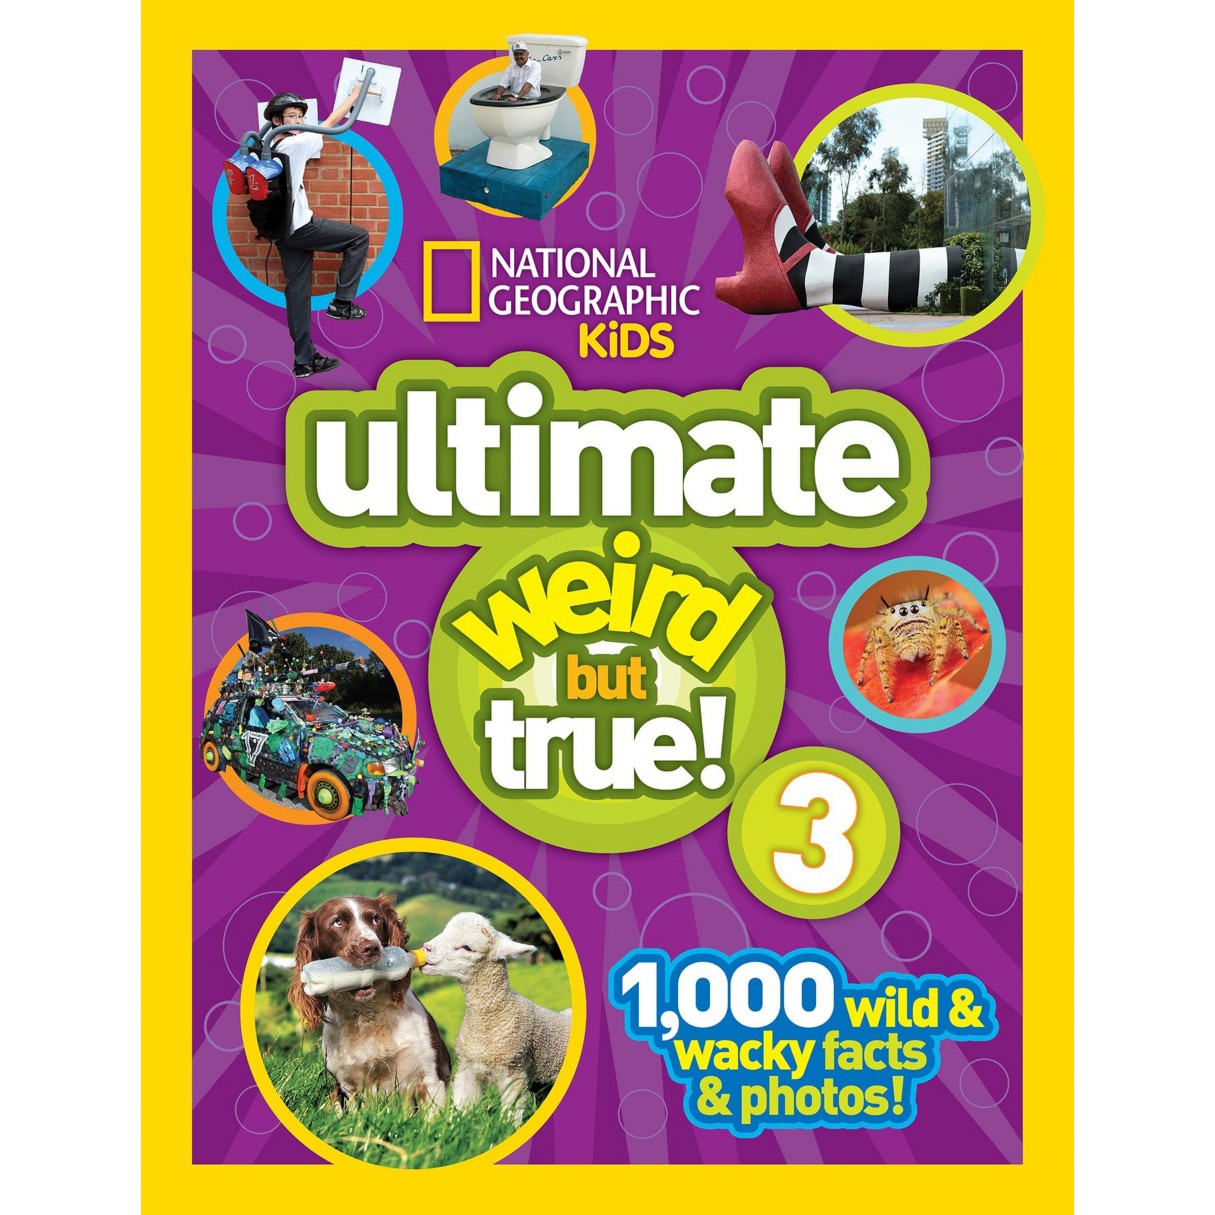 Ultimate Weird but True! Book Volume 3 – National Geographic